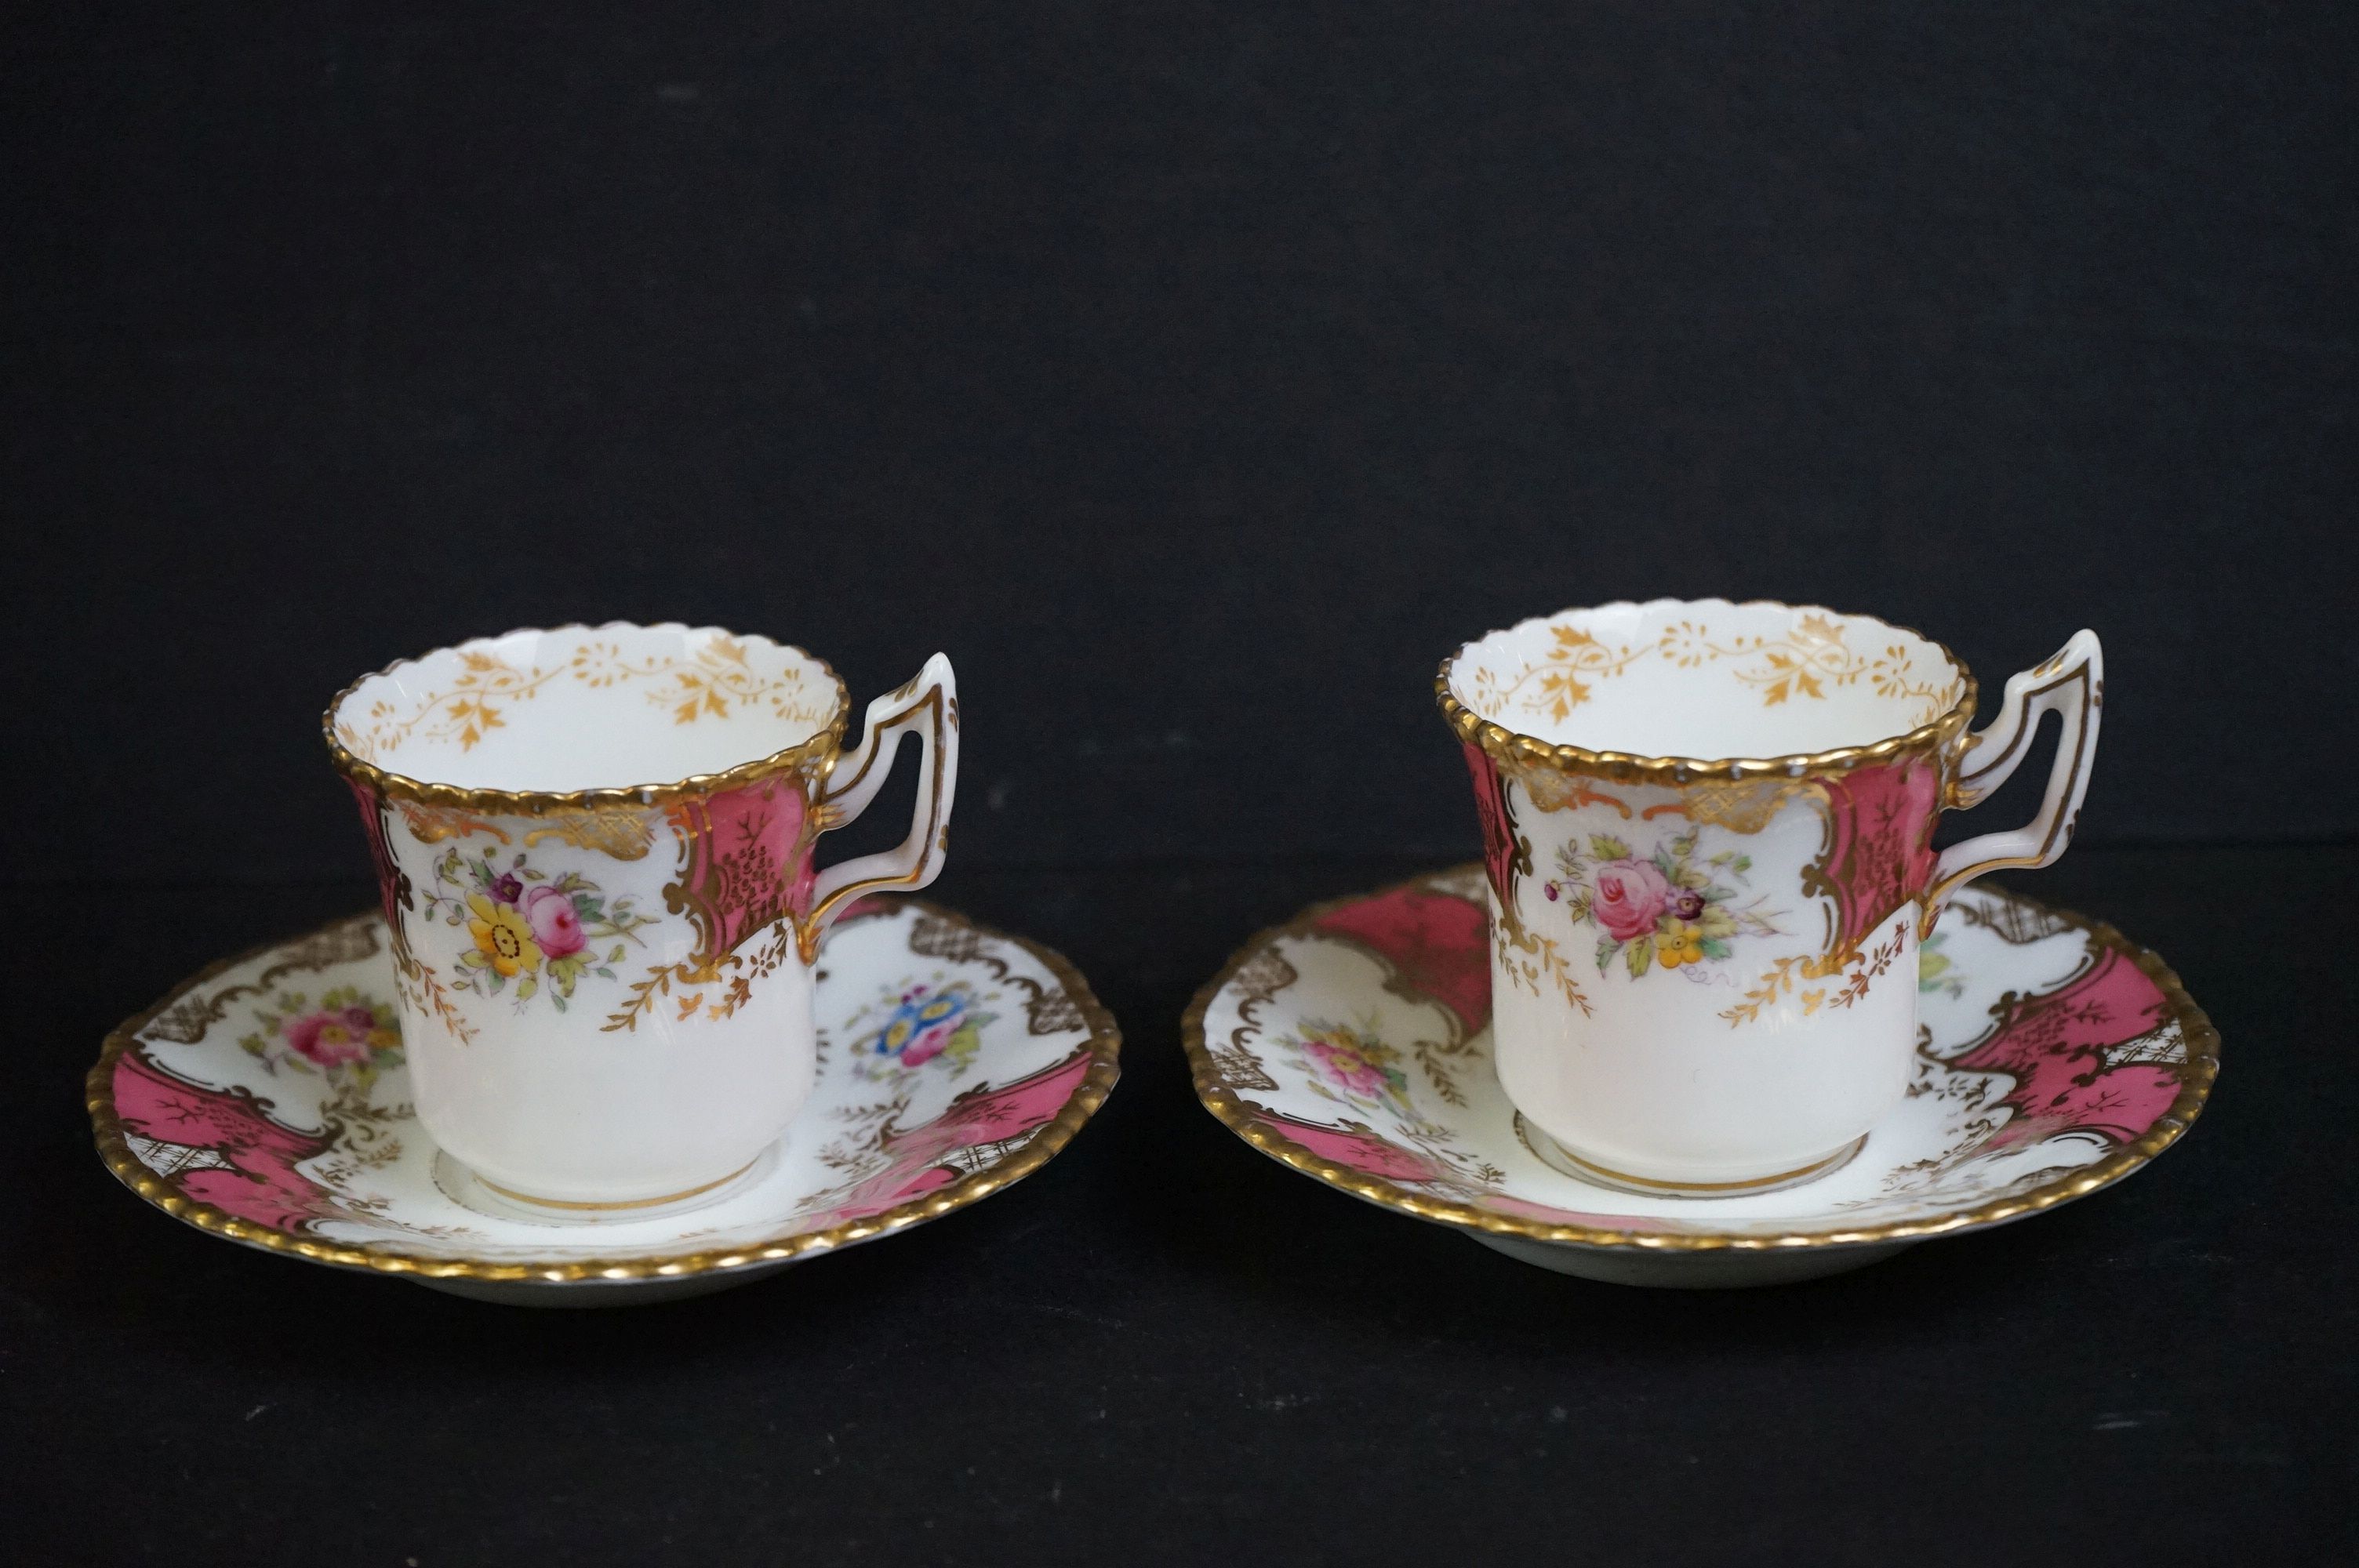 Early 20th century Coalport Cabinet part Coffee Set decorated in pink and gilt with floral sprays - Image 12 of 24